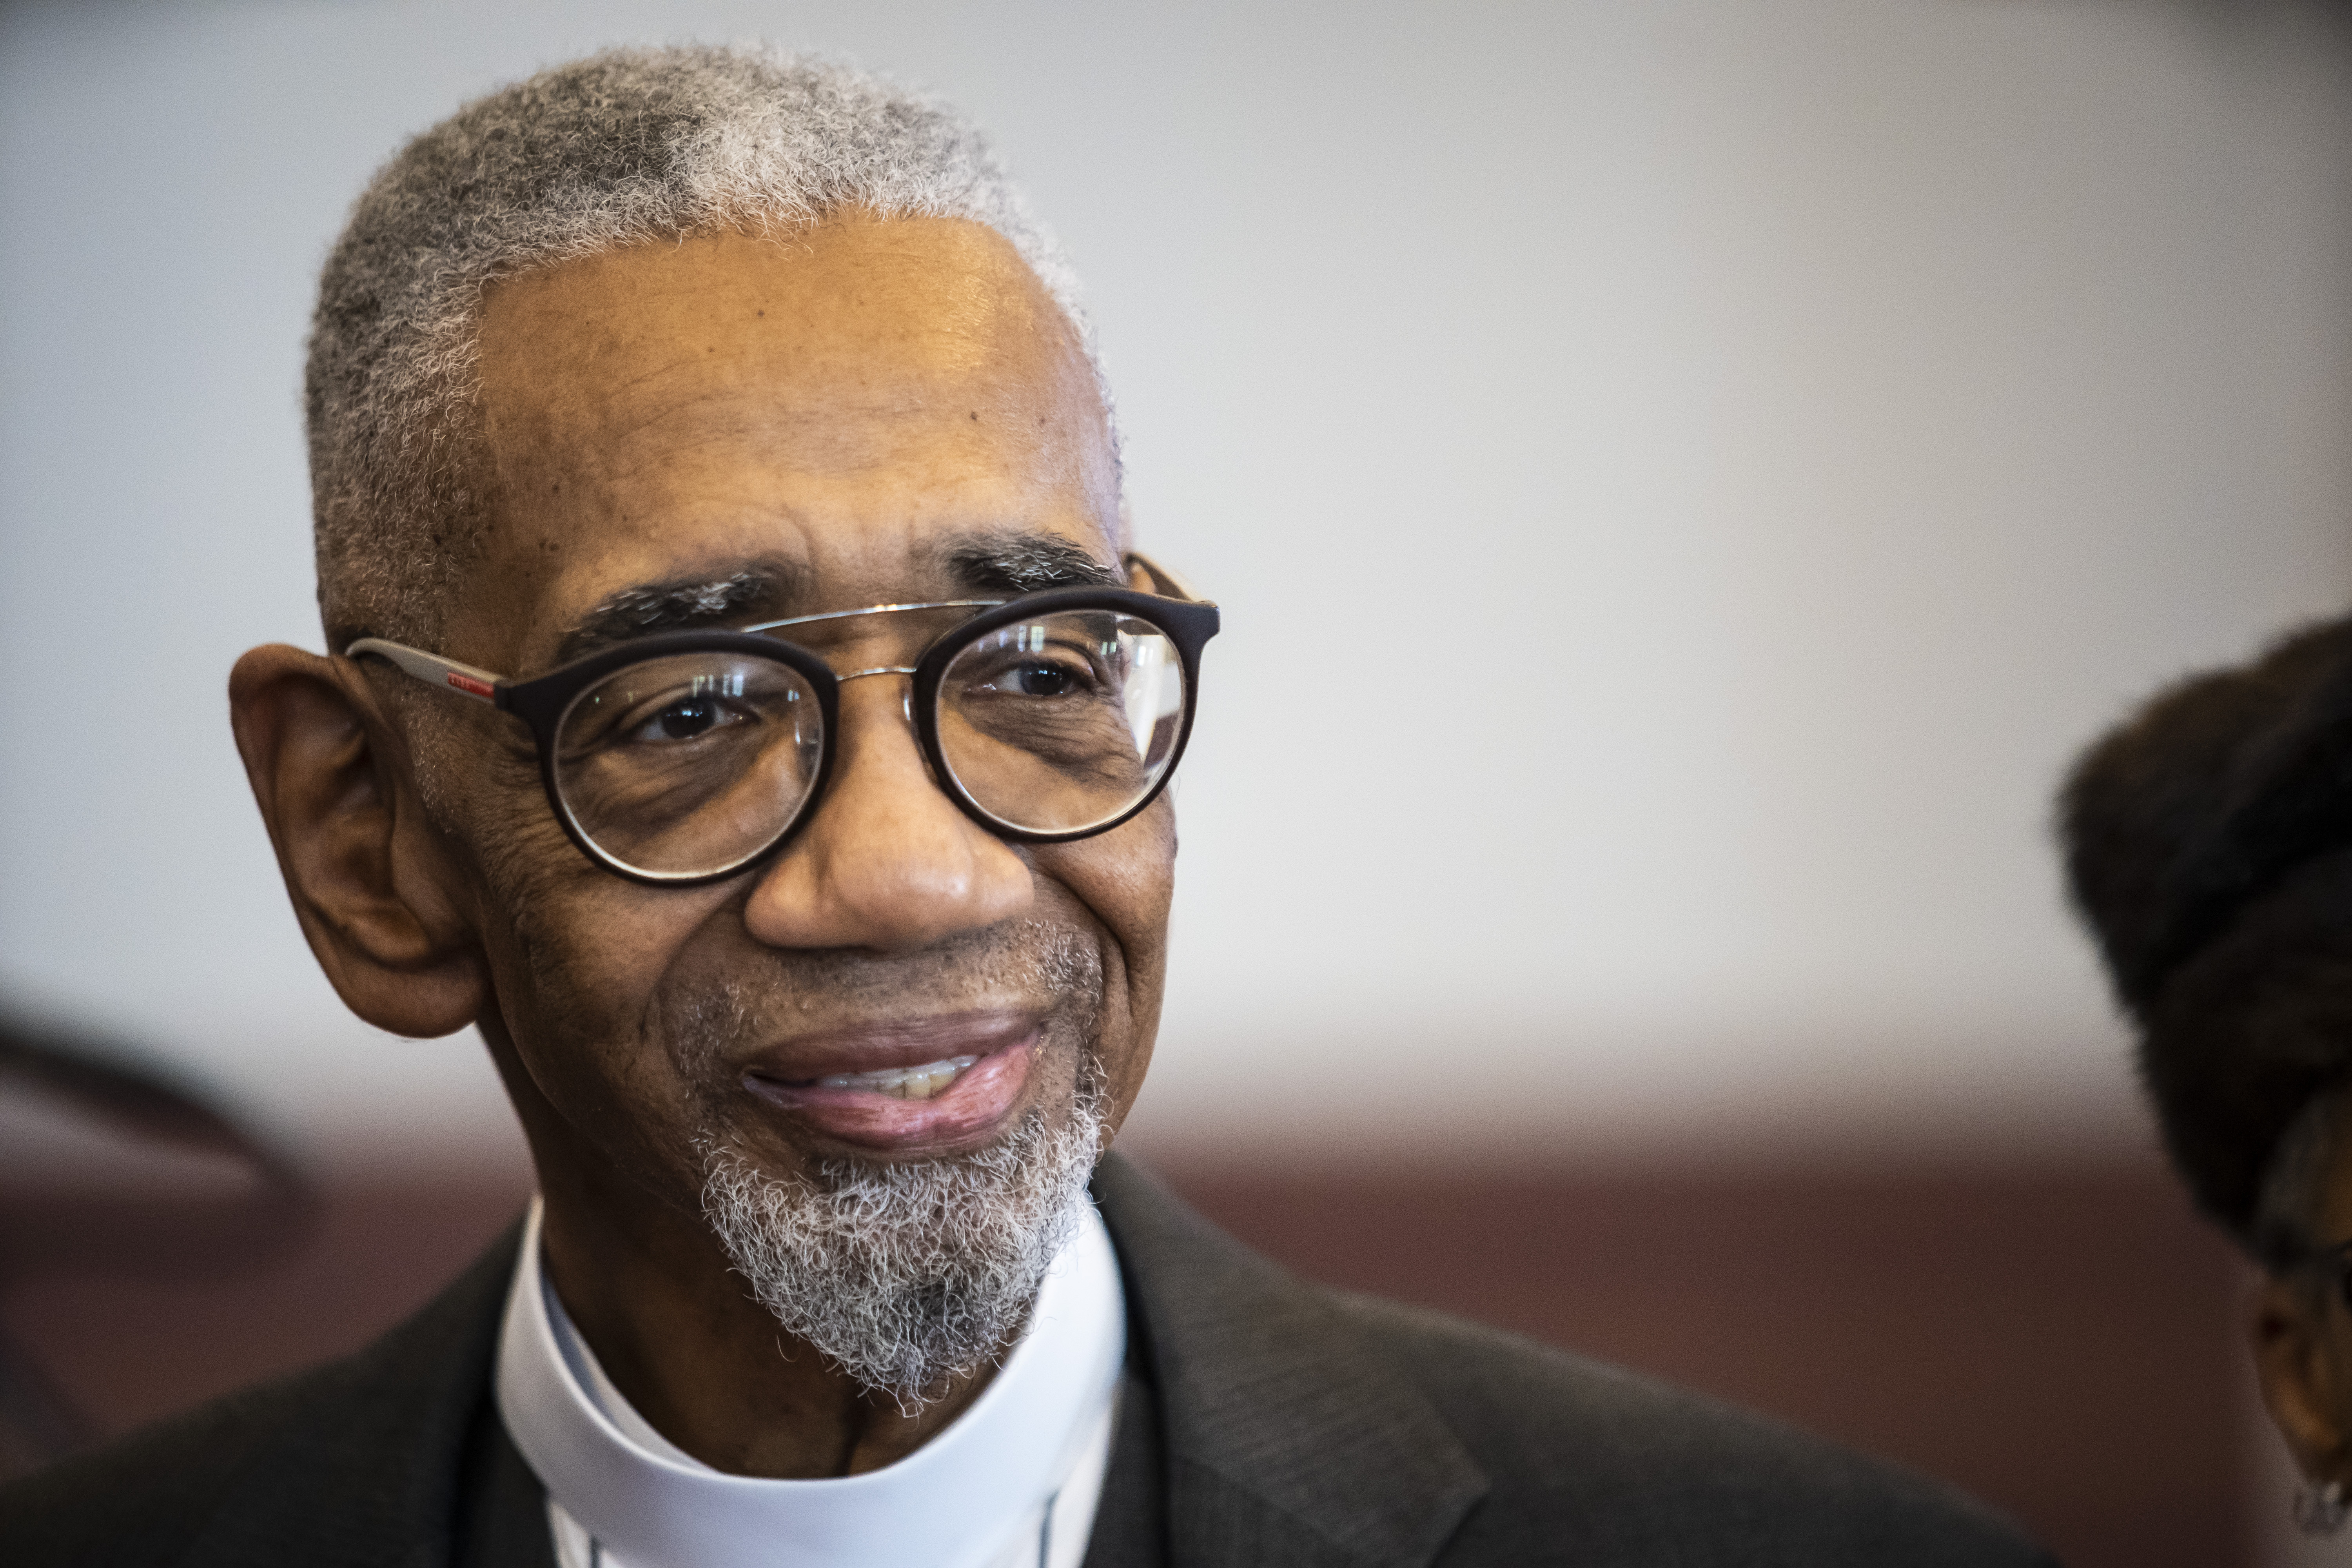 U.S. Rep. Bobby Rush, D-Ill., smiles during a news conference at Roberts Temple Church Of God In Christ in Chicago, Ill., Tuesday morning, Jan. 4, 2022, where he announced that he will not be seeking a 16th term in the U.S. House of Representatives. Rush, 75, a former Black Panther and an ex-Chicago alderman and minister, was first elected to Congress in 1992. (Ashlee Rezin/Chicago Sun-Times via AP) ORG XMIT: ILCHS406